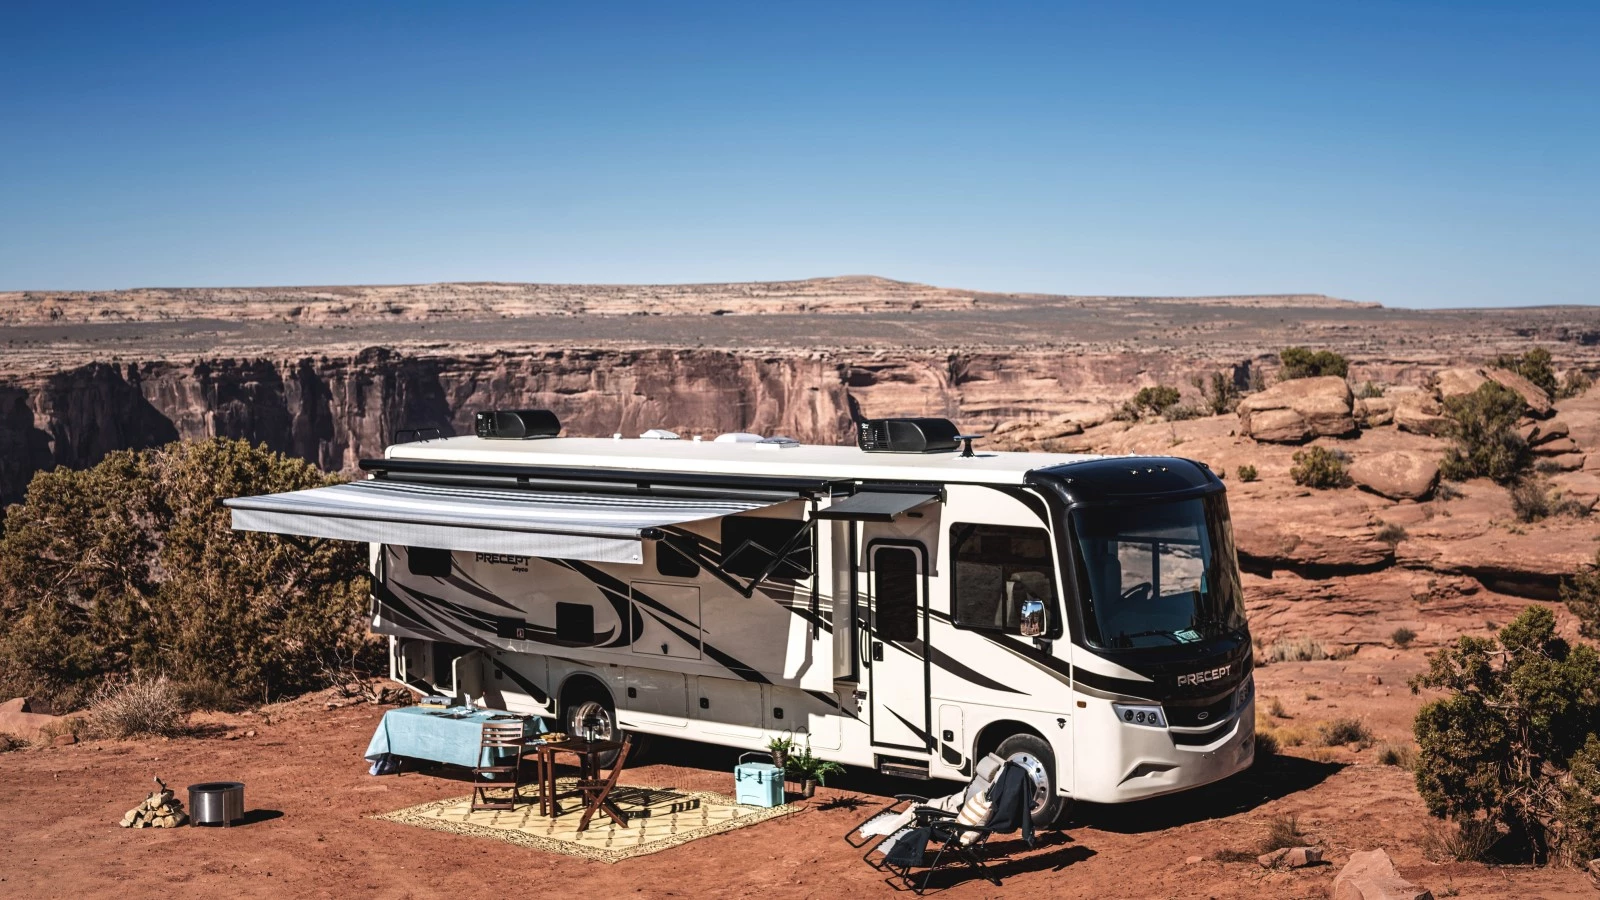 lateral view of a Class A Jayco Precept motorhome camped by a canyon